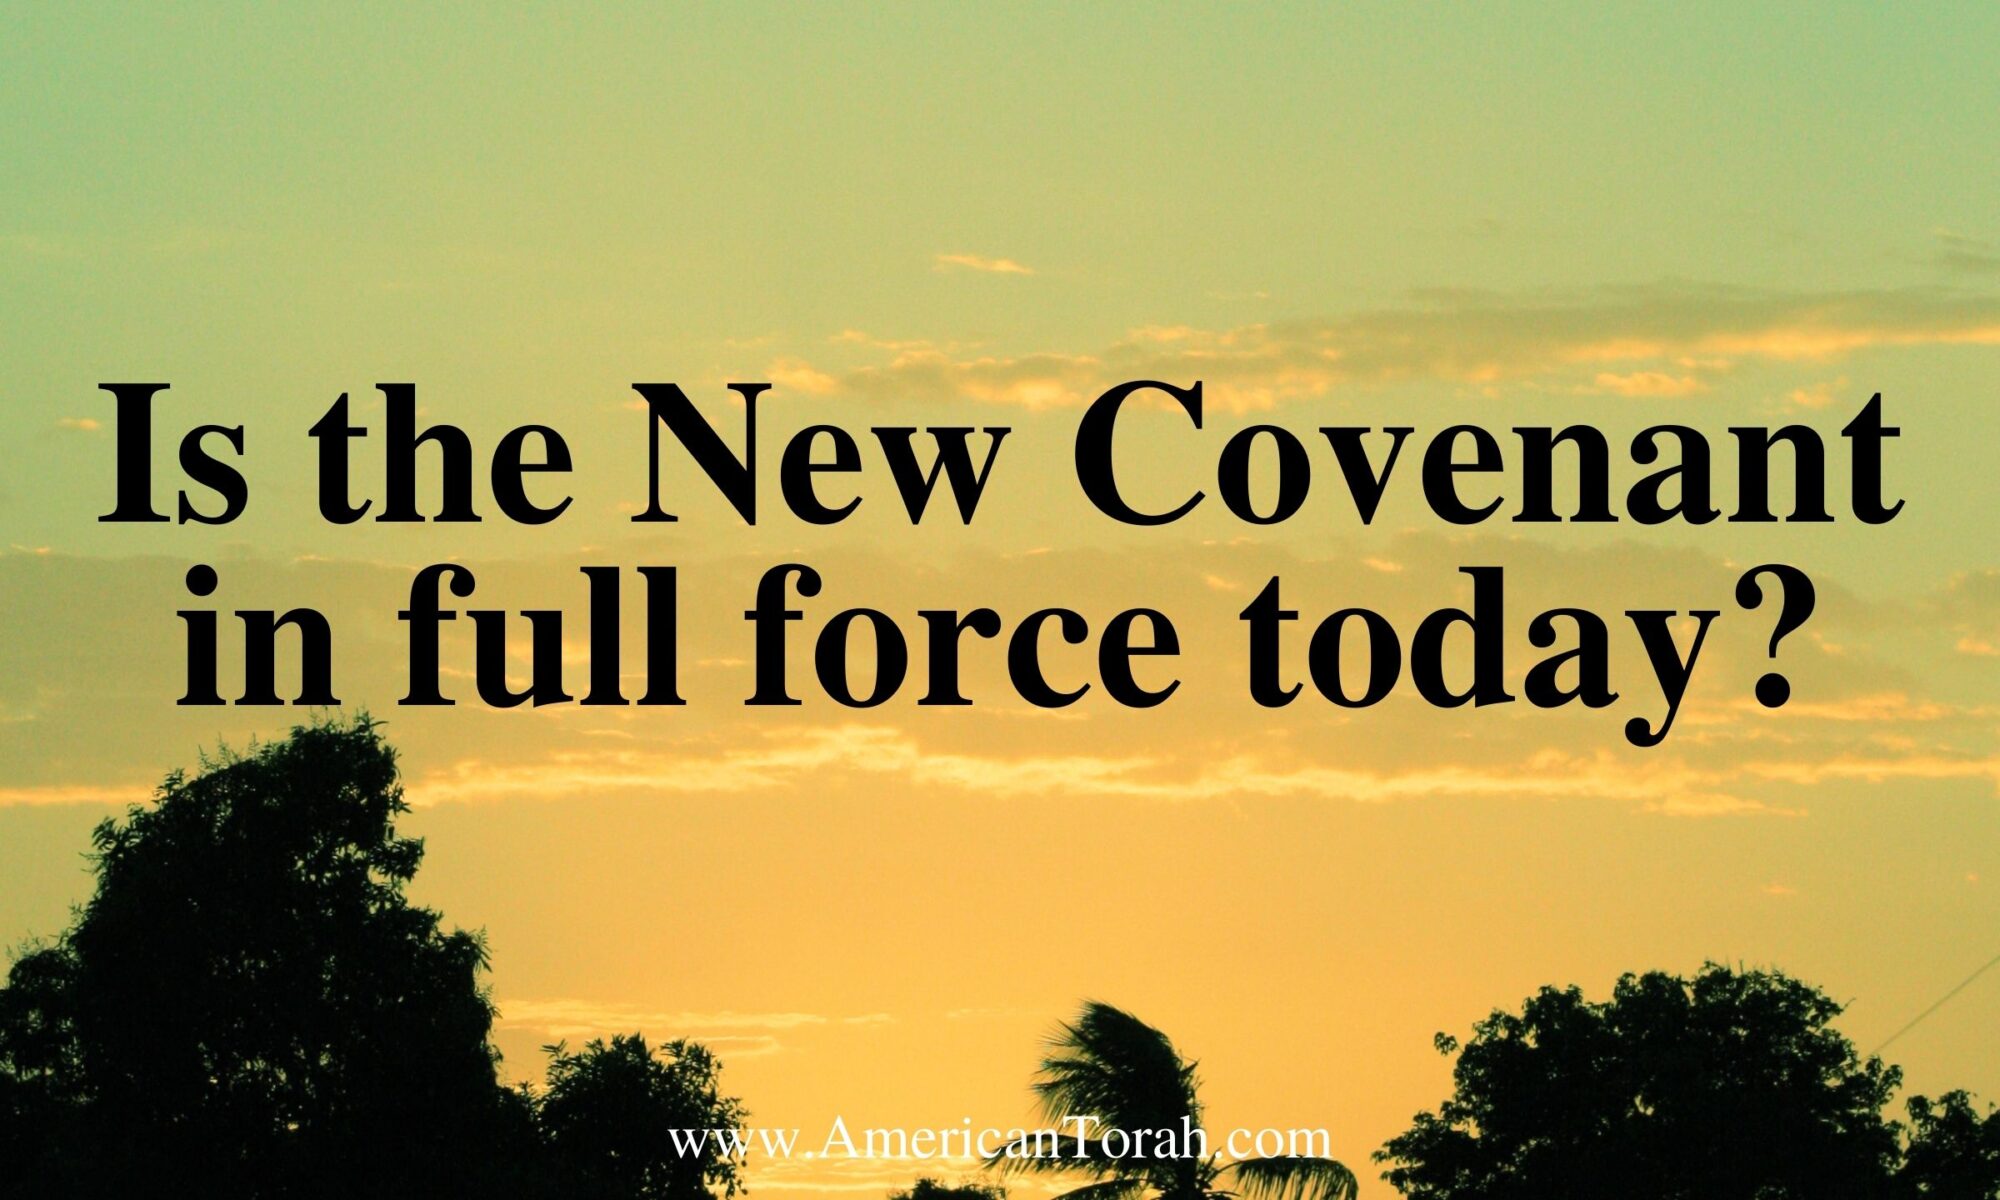 Is the New Covenant fully in force today? Since Jeremiah says it is only for Israel and Jews, what does it mean for Christians?